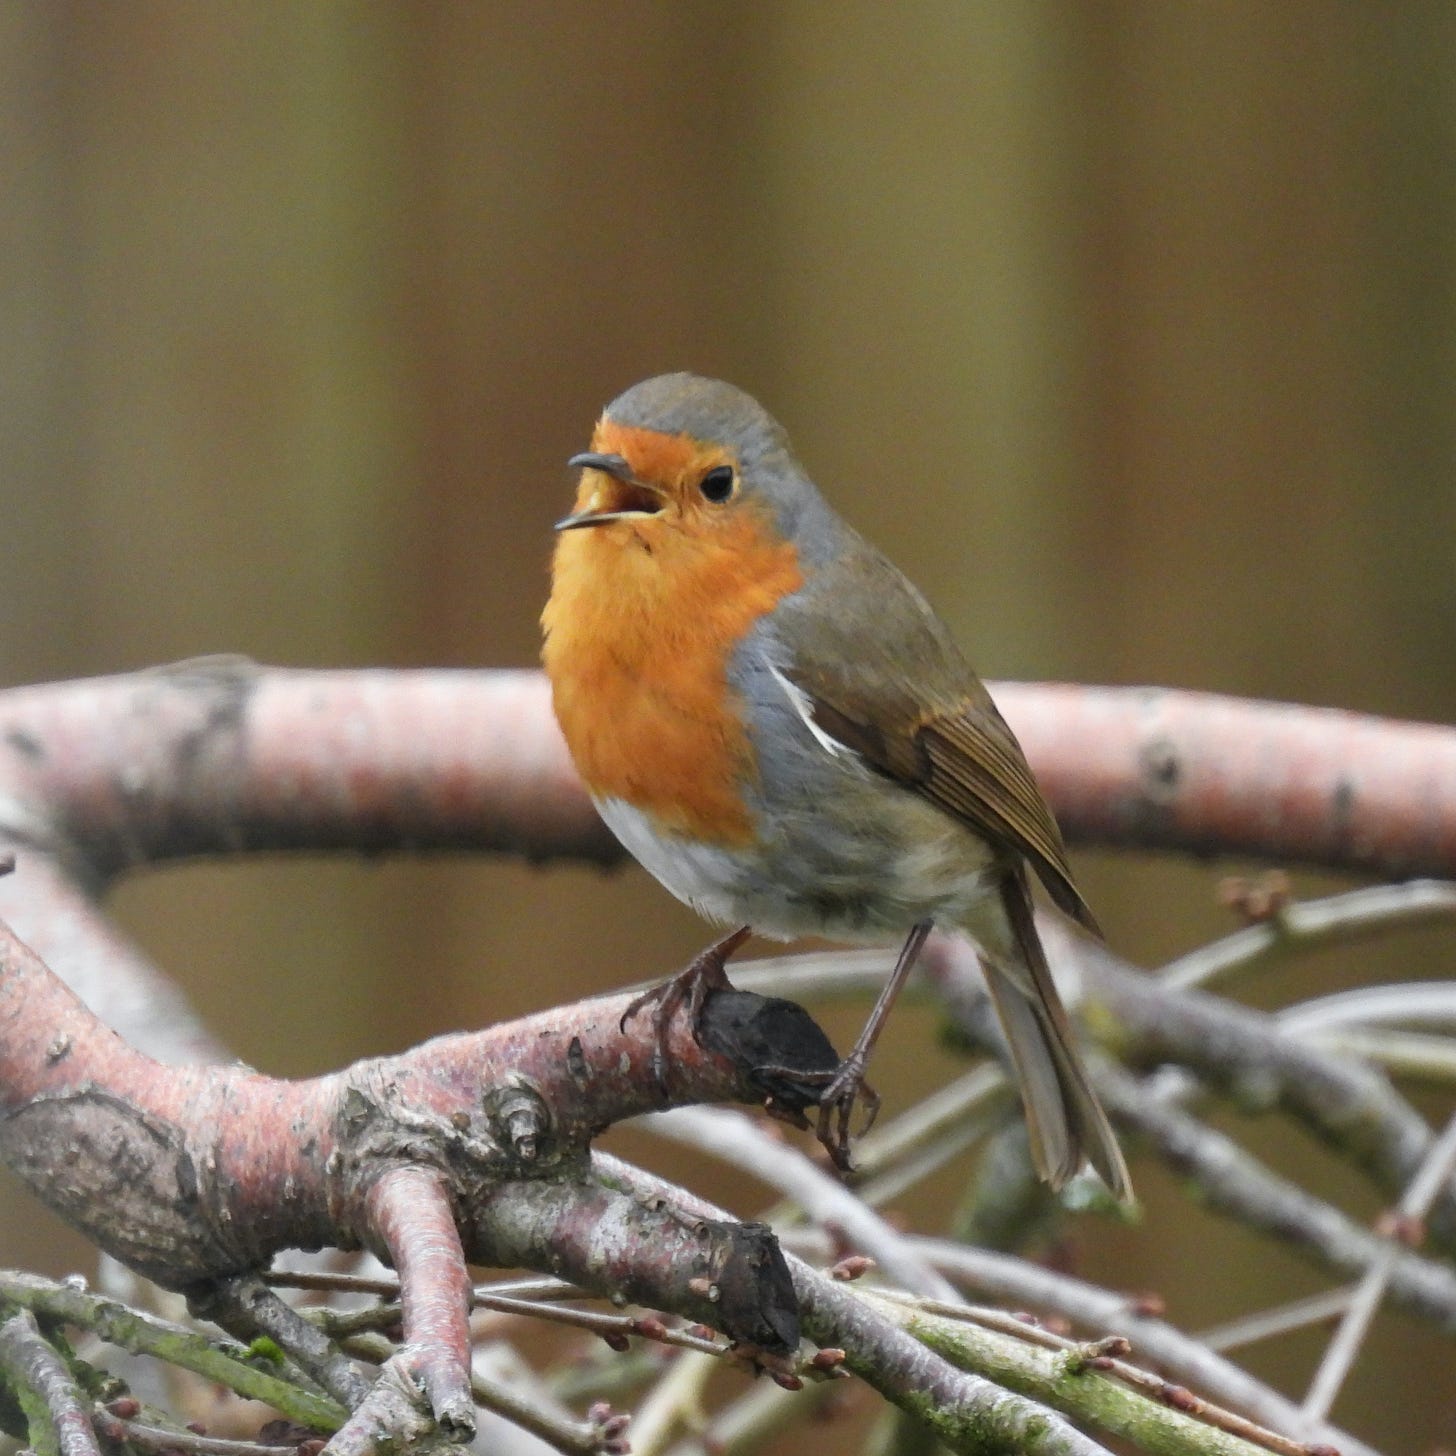 Robin sitting on tree branch, facing to the left. Its bill is open as it was singing